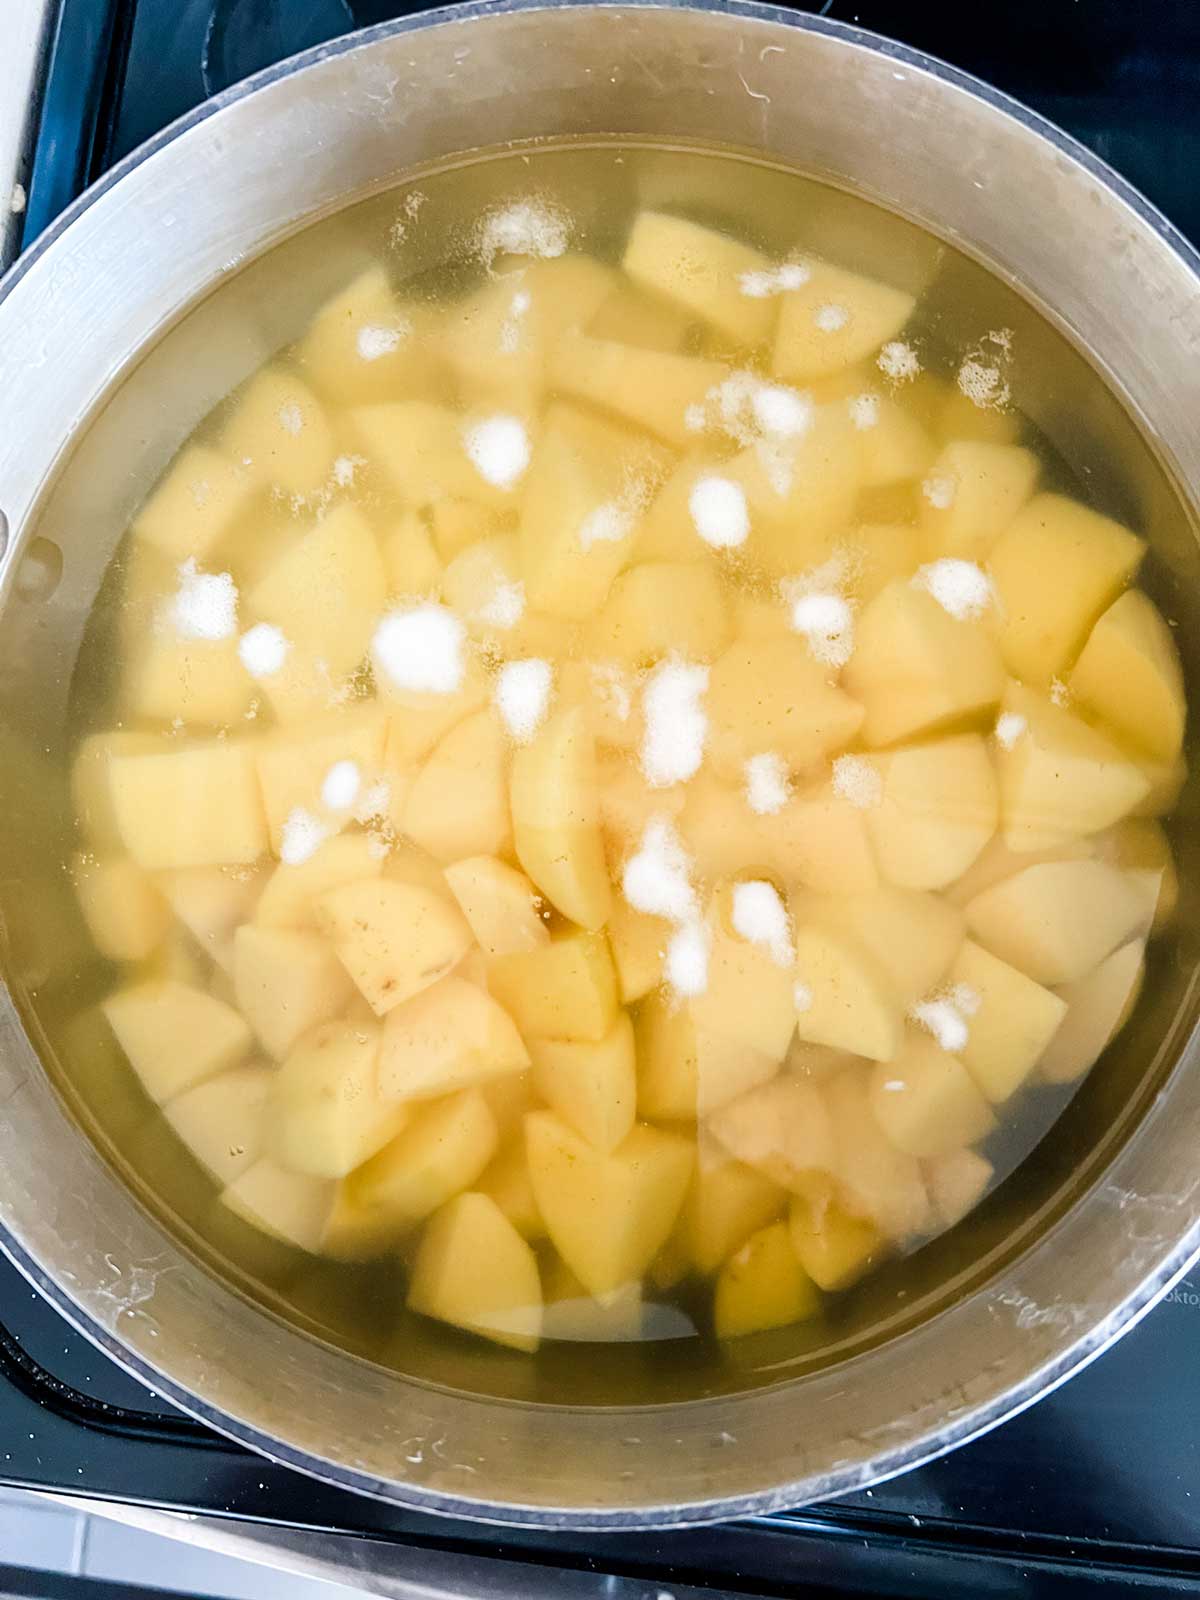 Diced yukon gold potatoes in a pot of water.